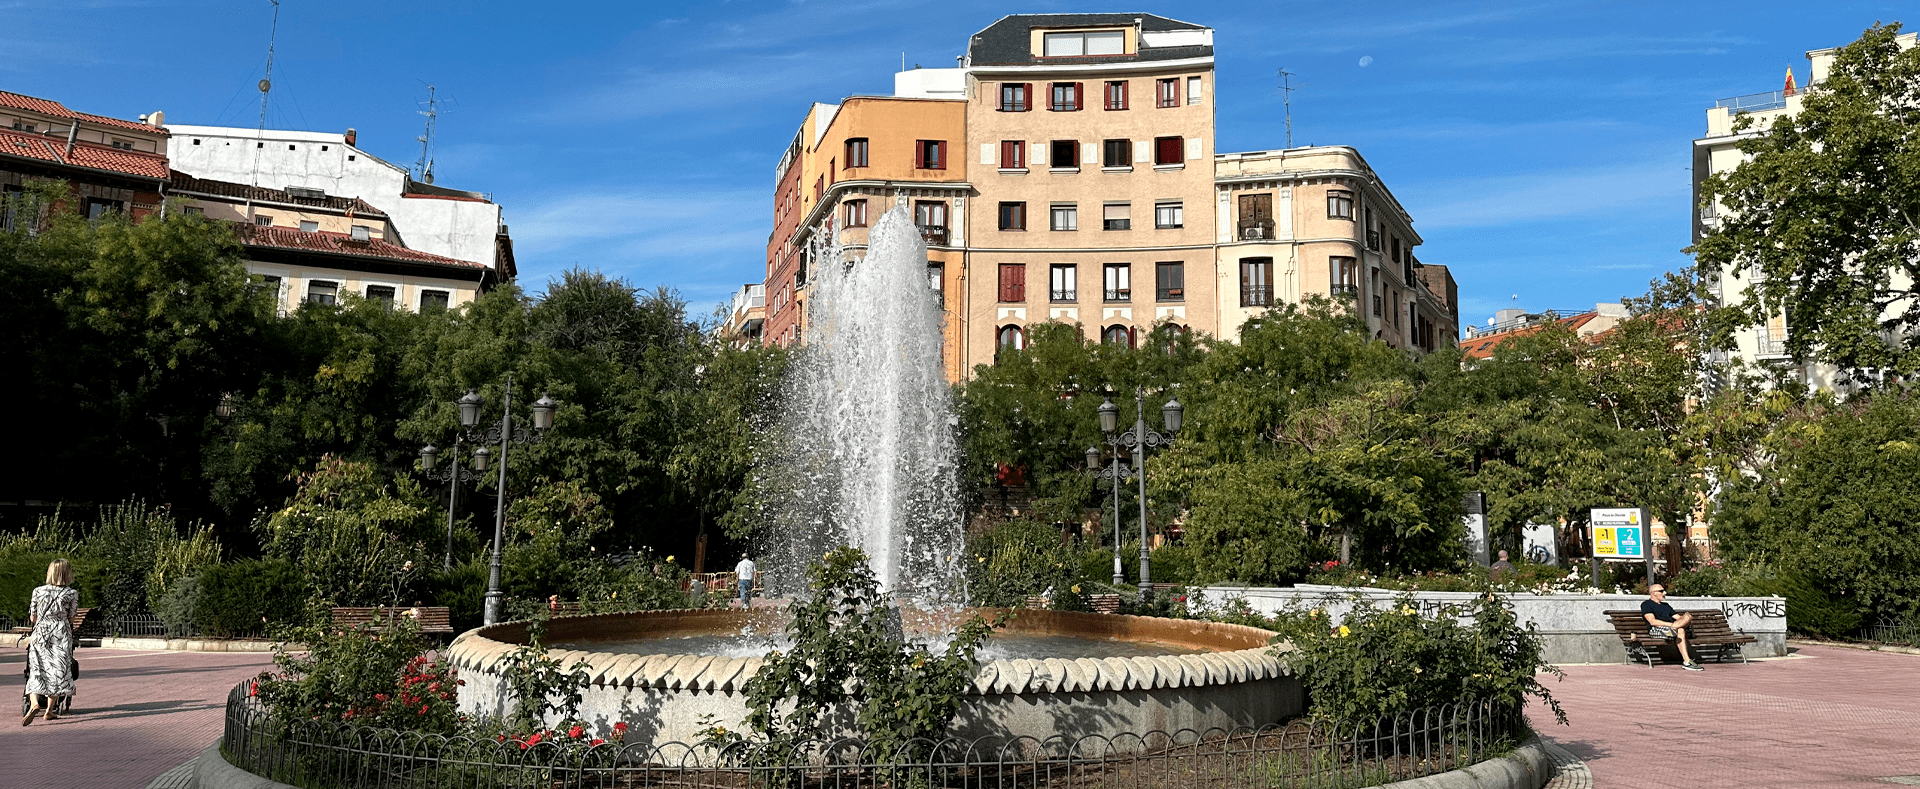 Fountain squirting water in Plaza Olavide, in Madrid, Spain. Apartment buildings in the background.